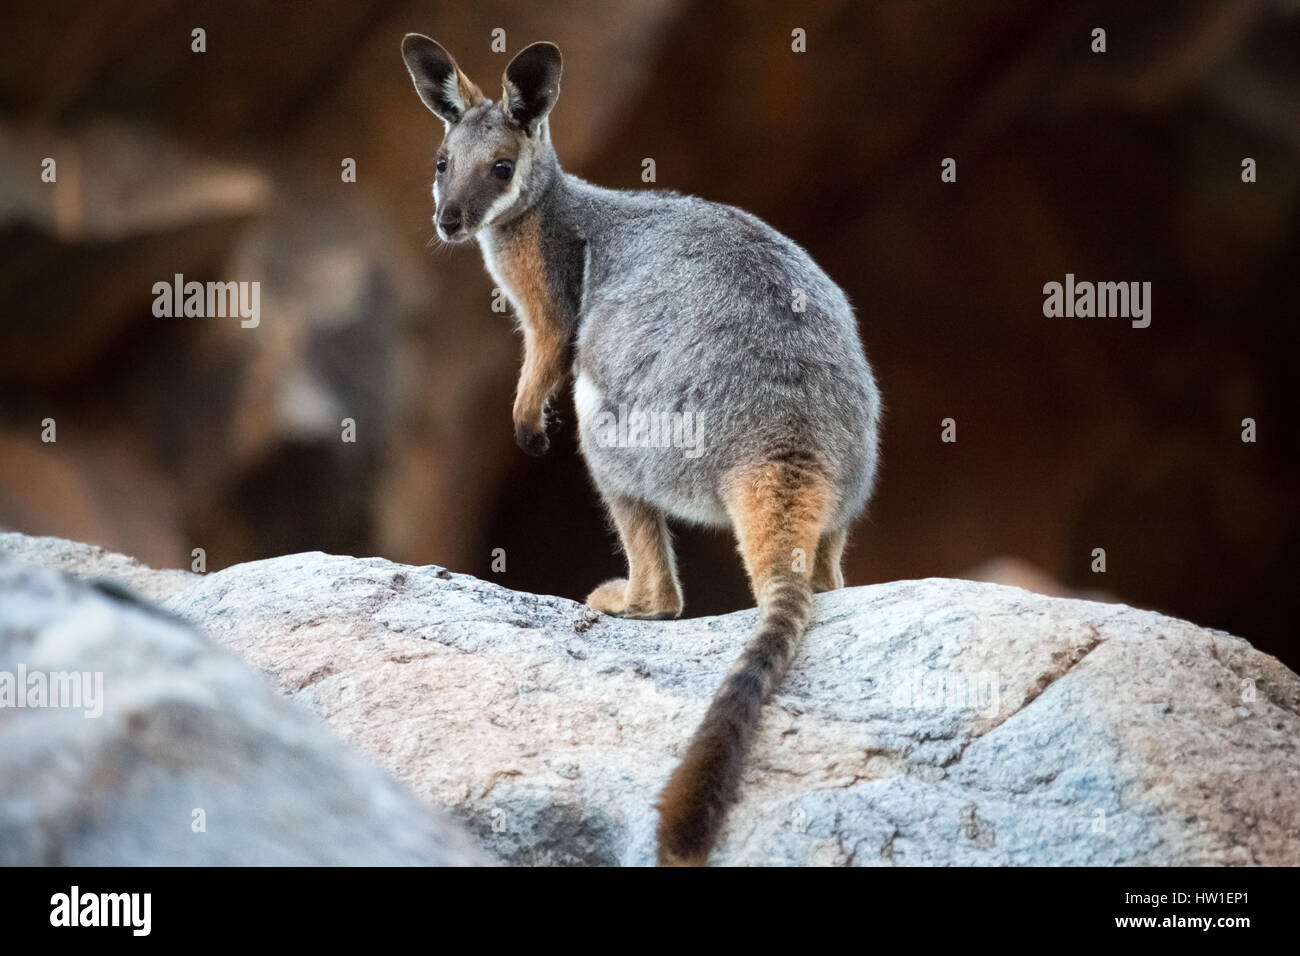 Gelb-footed Rock-Wallaby (Petrogale Xanthopus) Stockfoto